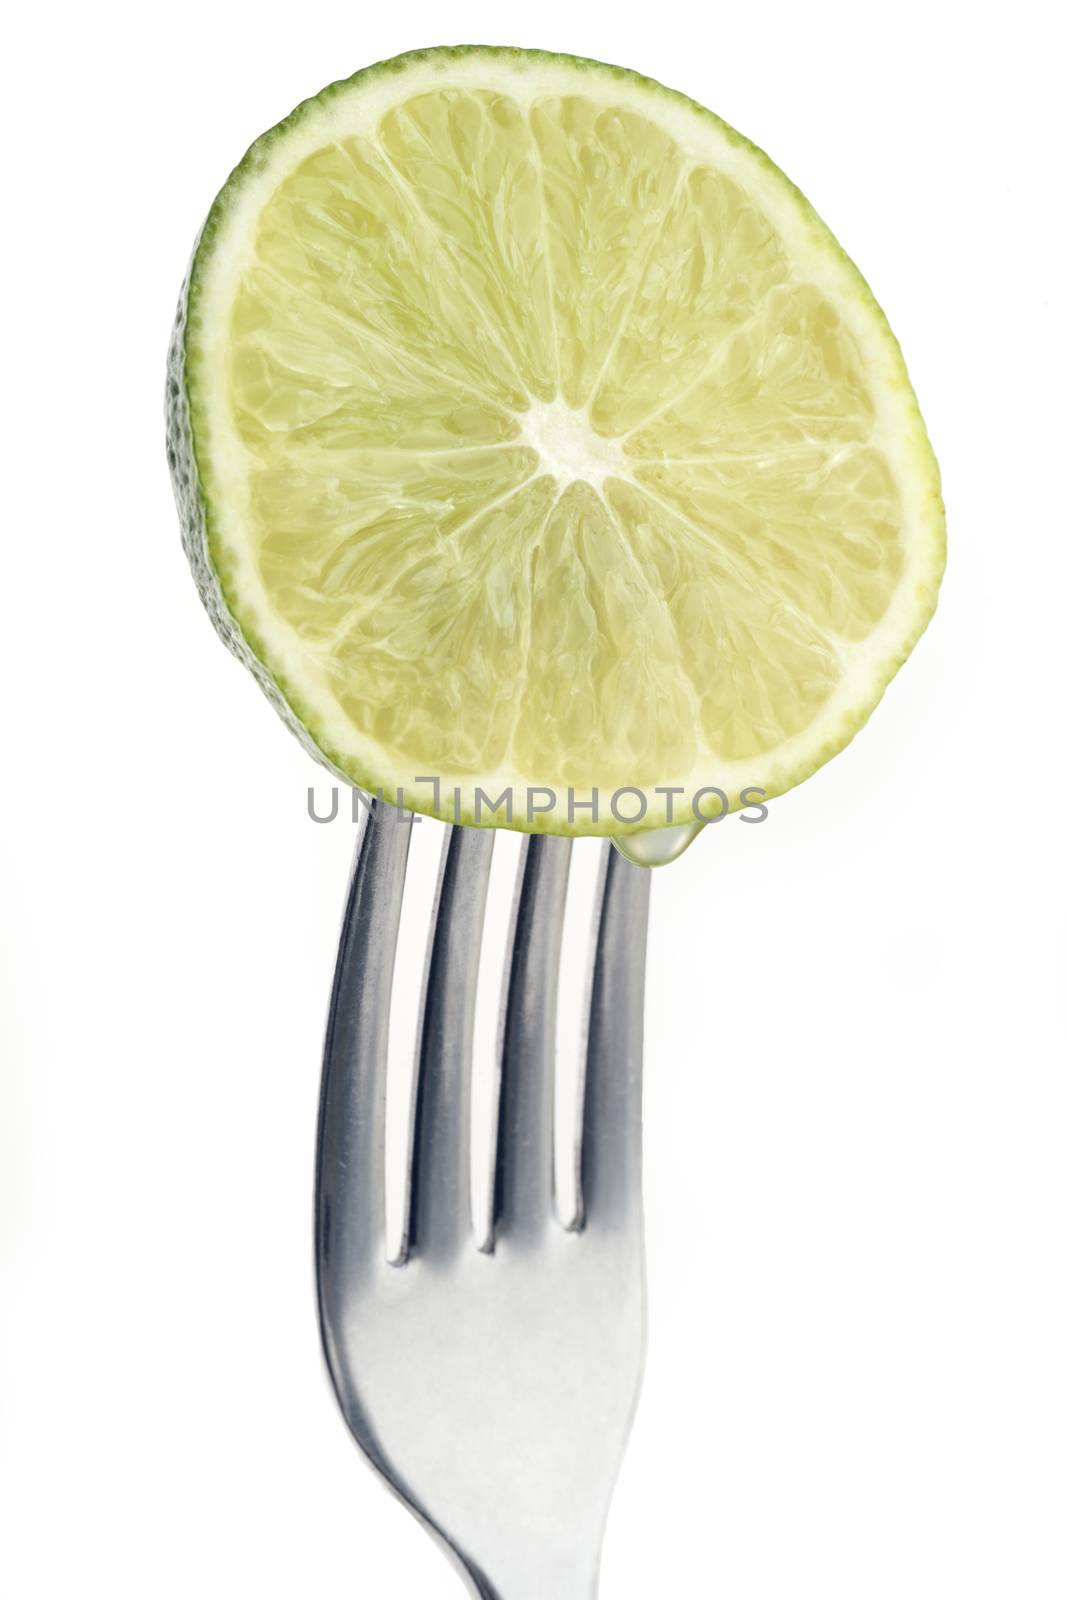 Lime on fork by gemphotography